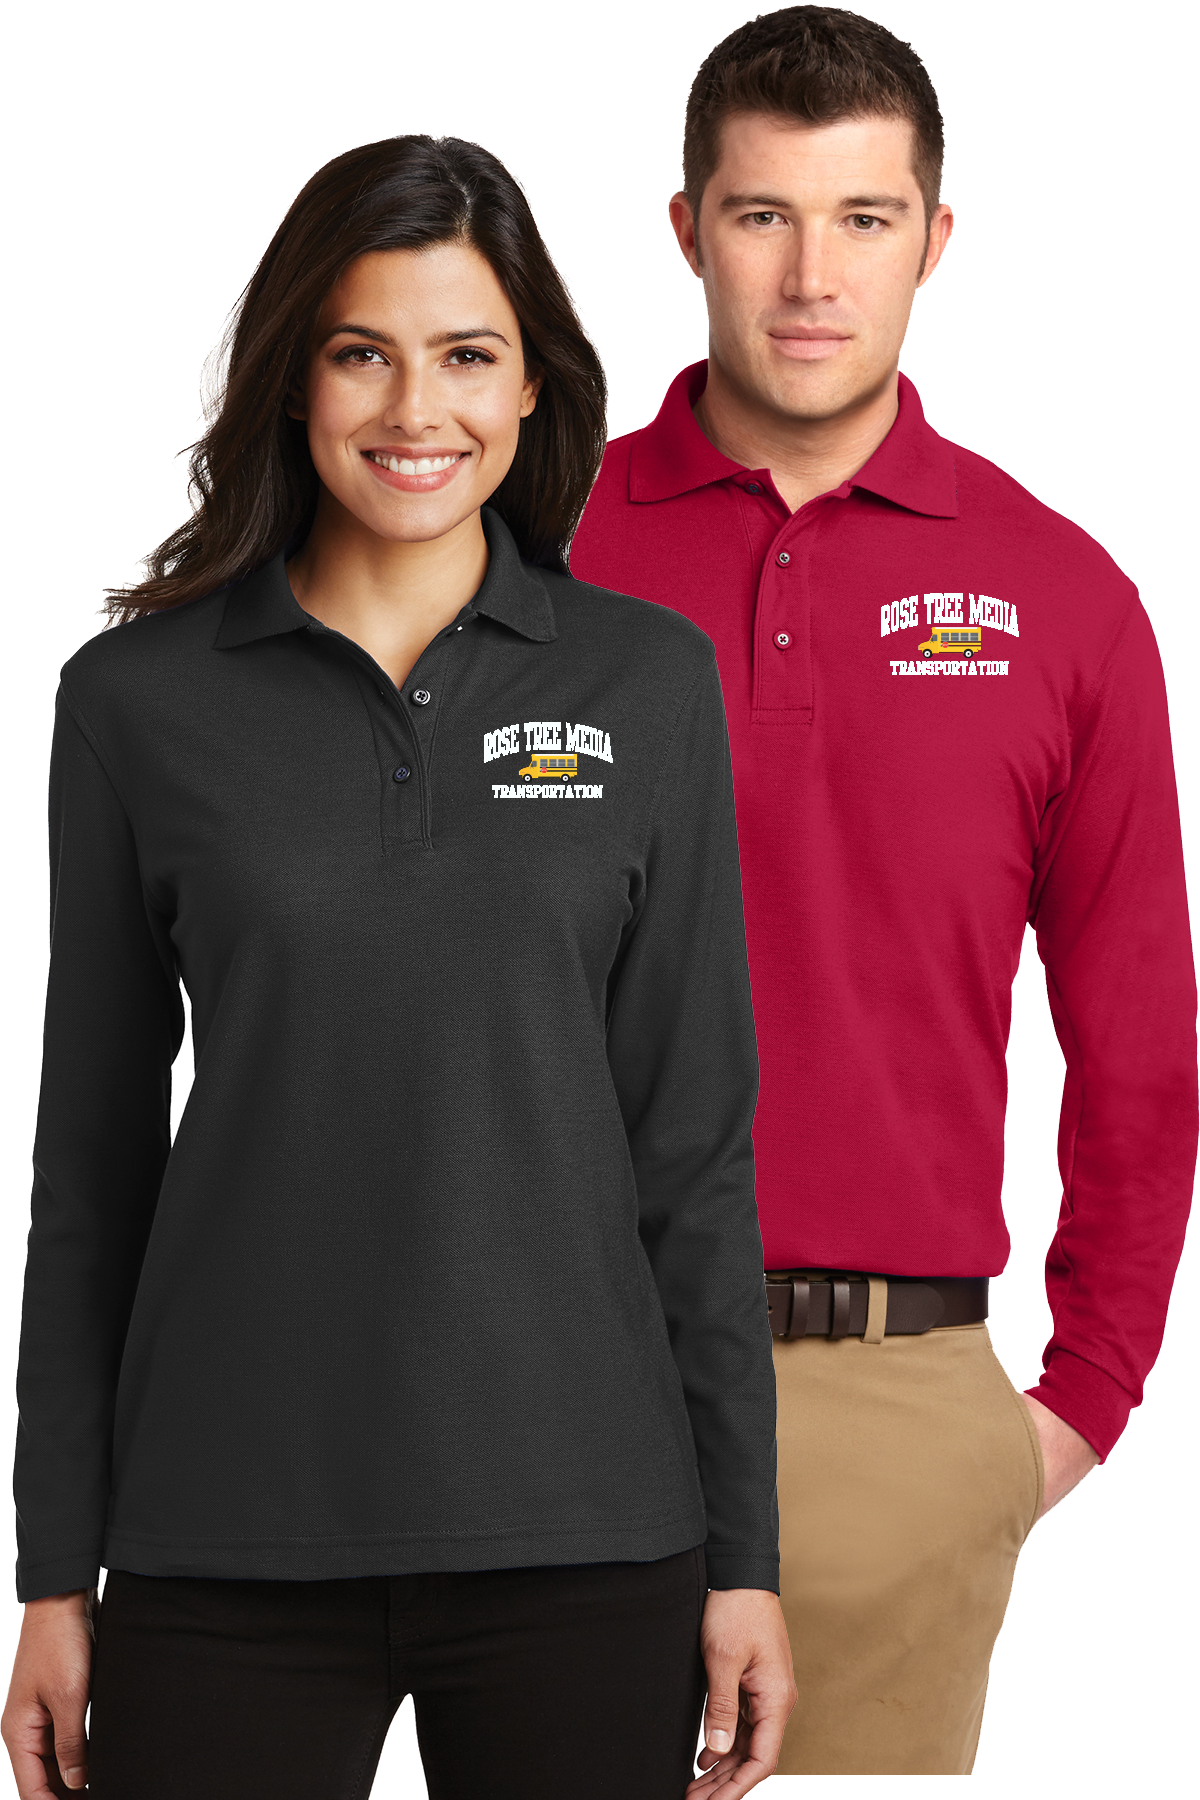 RTMT Women's and Men's Long Sleeve Polo